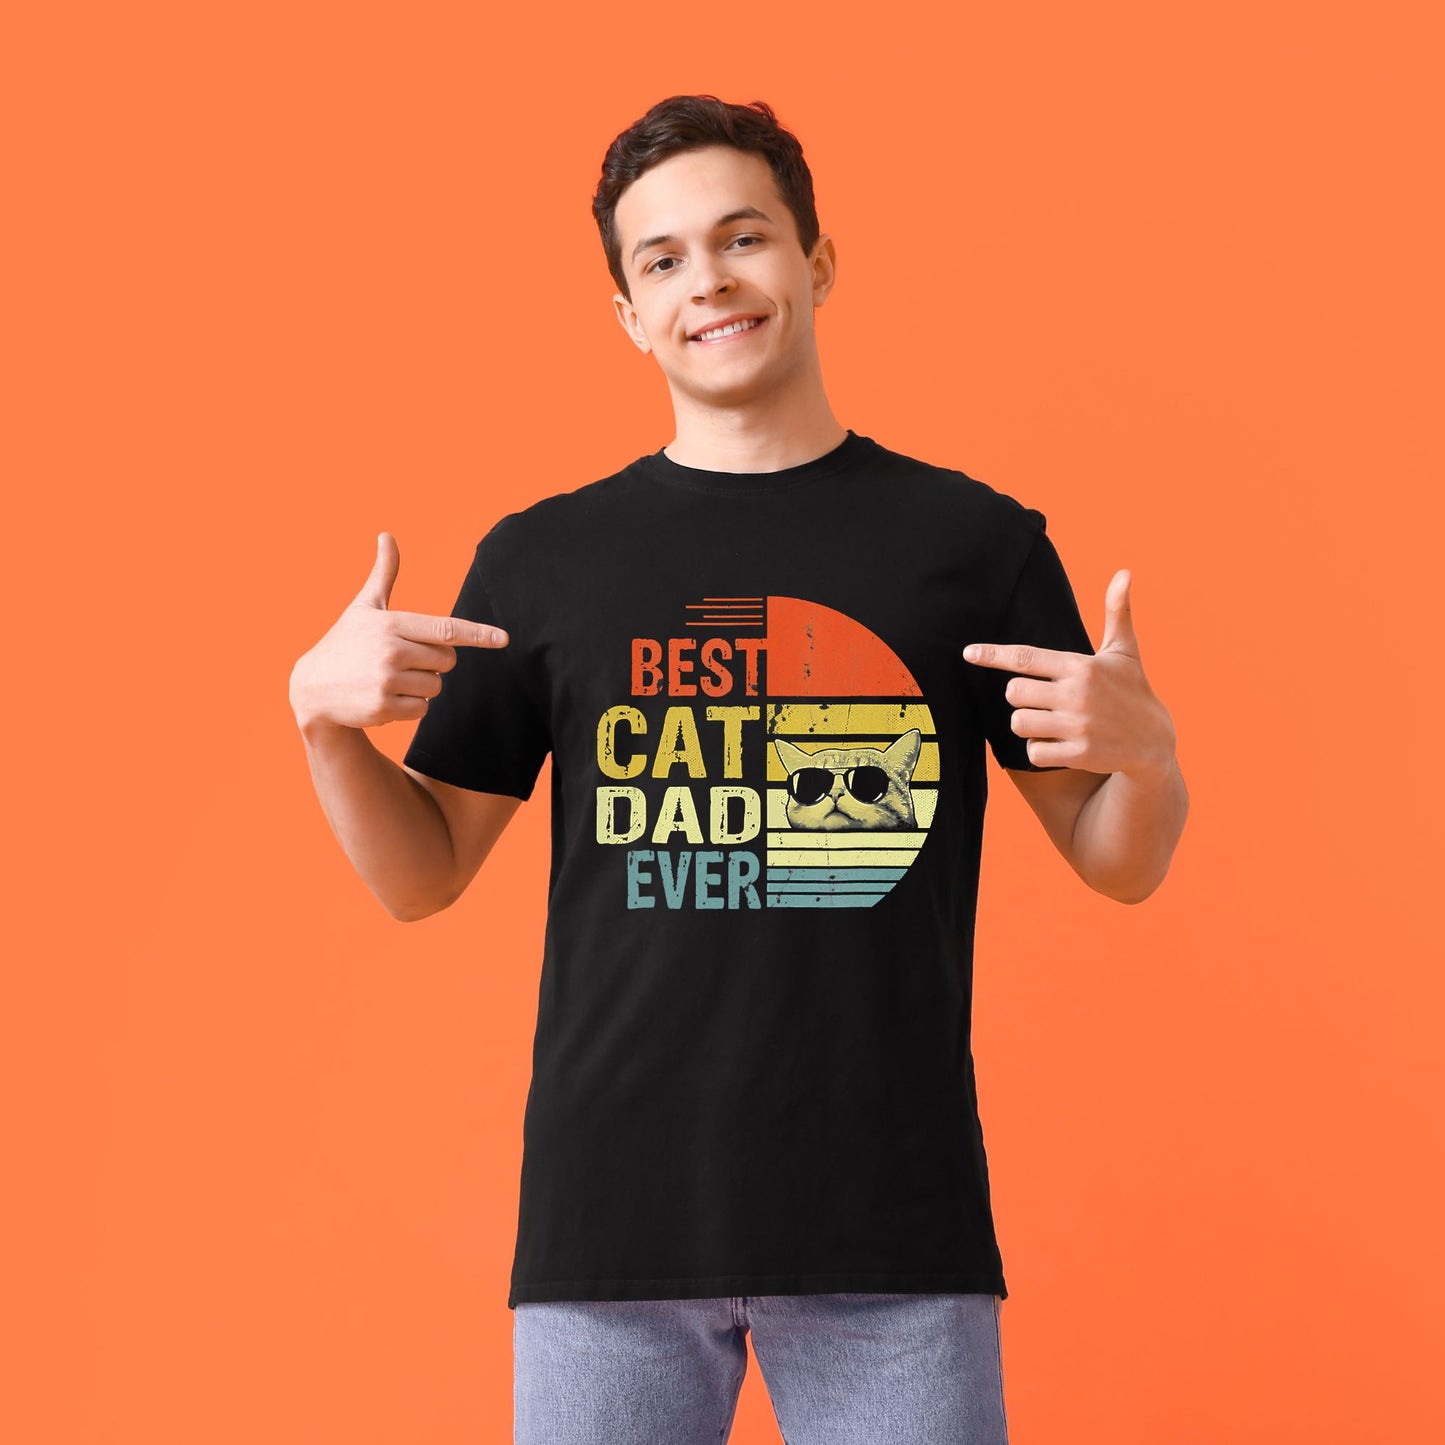 "Best Cat Dad Ever" Daddy T-Shirt: Perfect for Cat Lovers